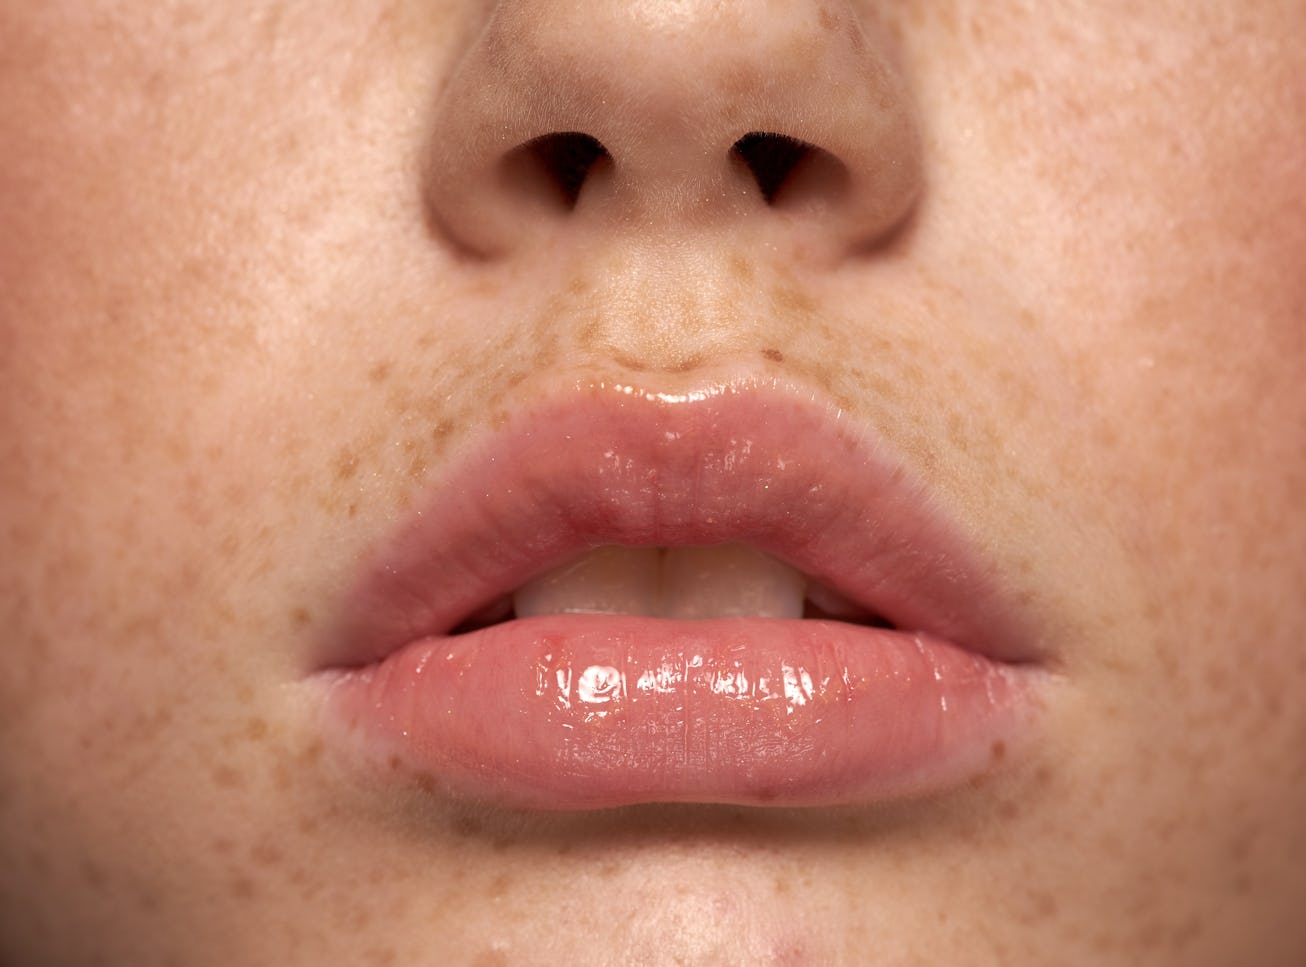 Amazing Lips young woman with Freckles Perfect Skin Closeup perfect natural lip makeup. Beautiful pl...